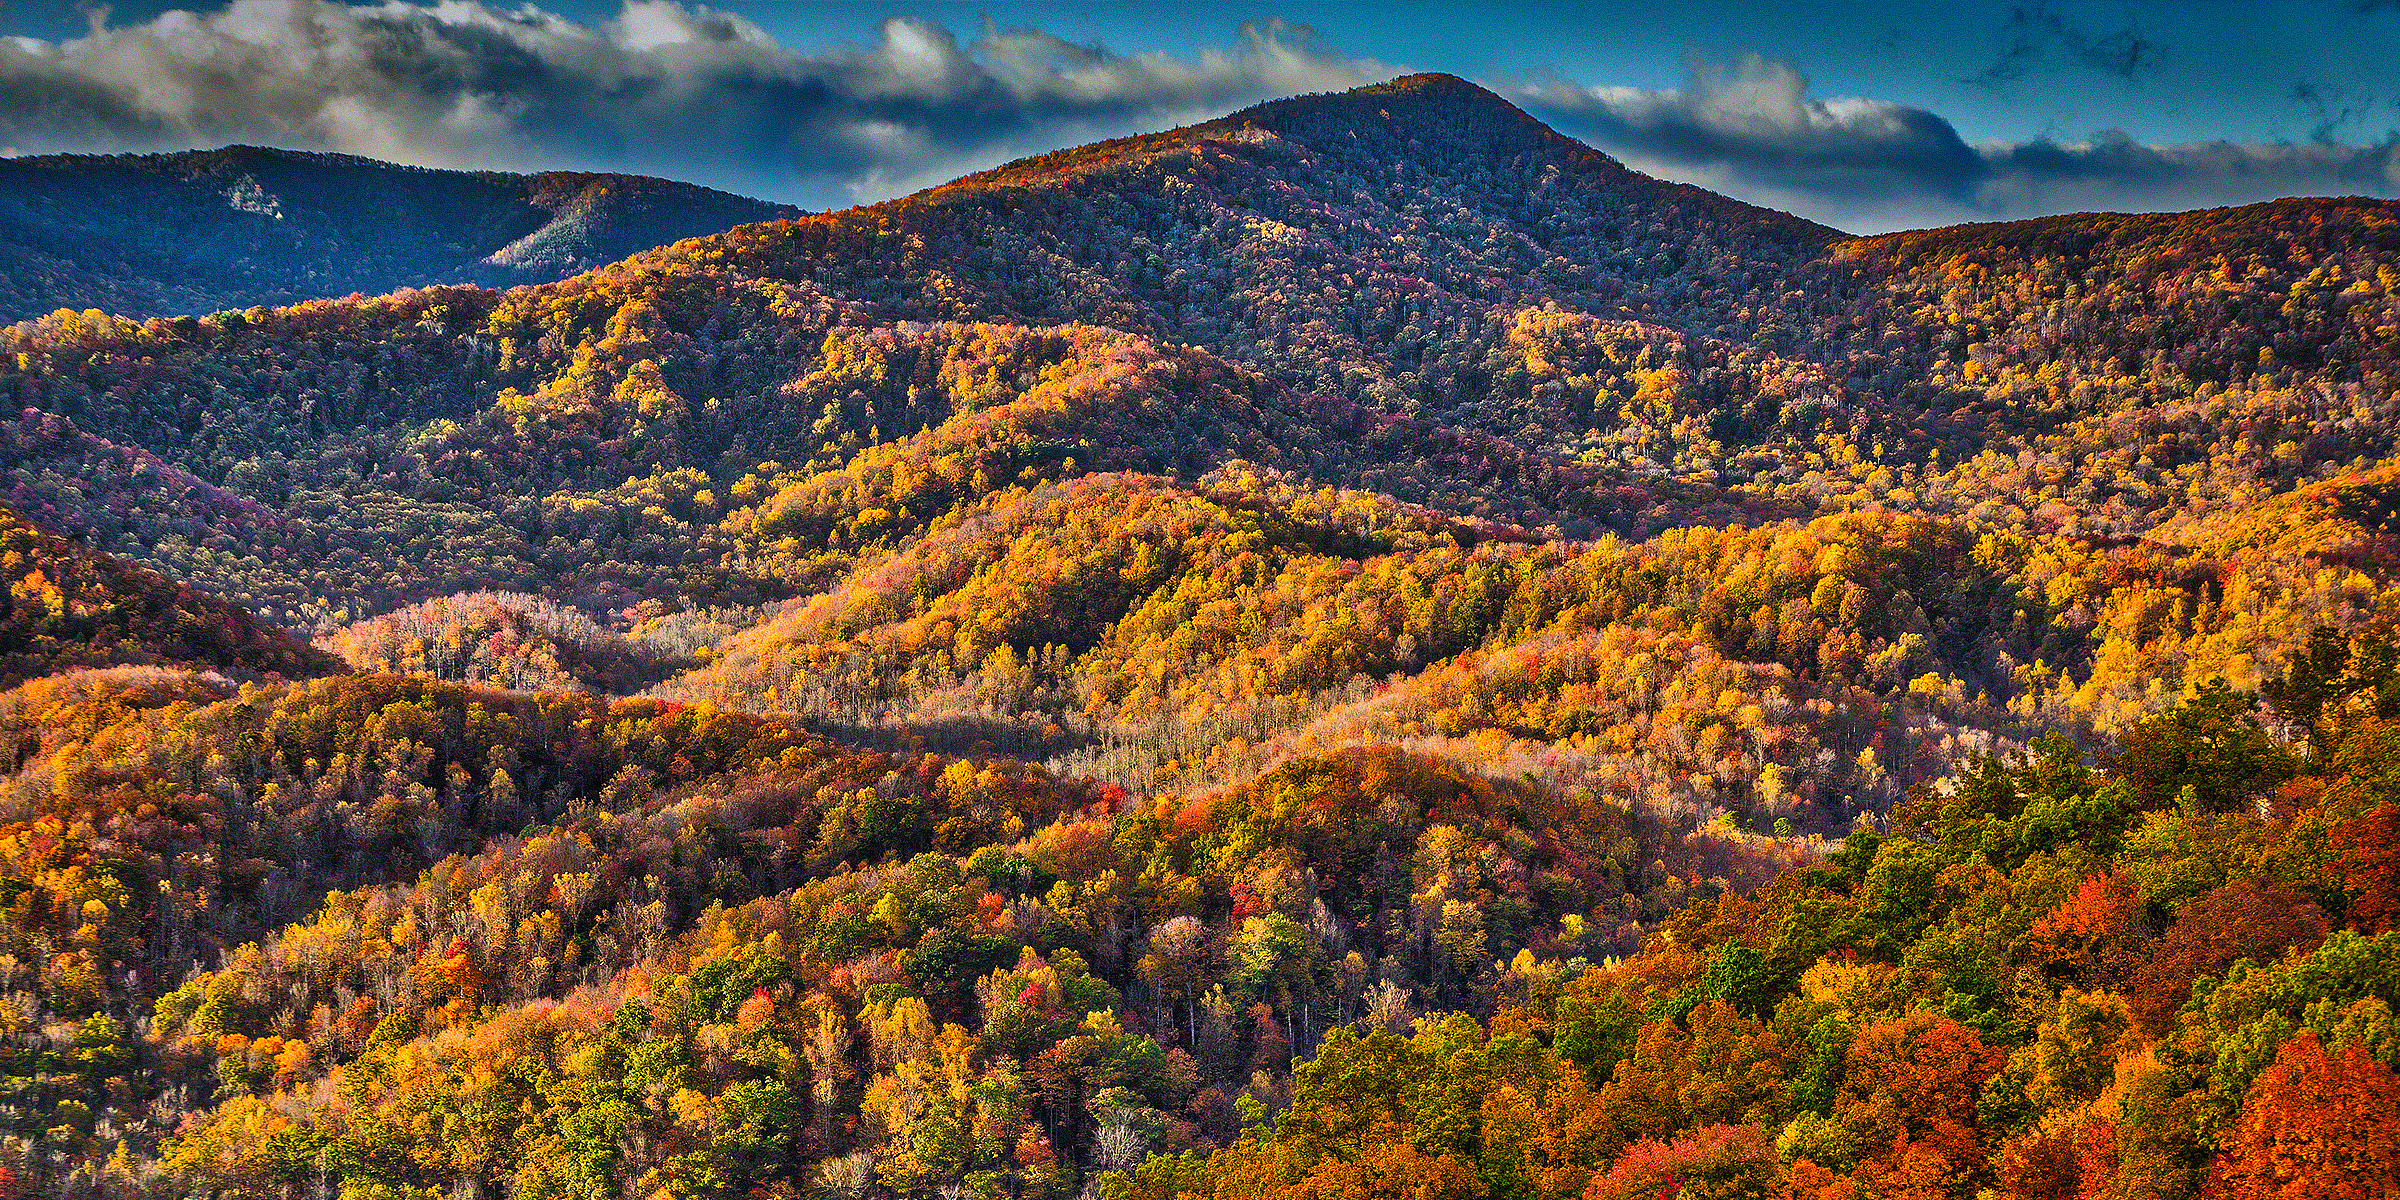 Great Smoky Mountains | Source: Shutterstock